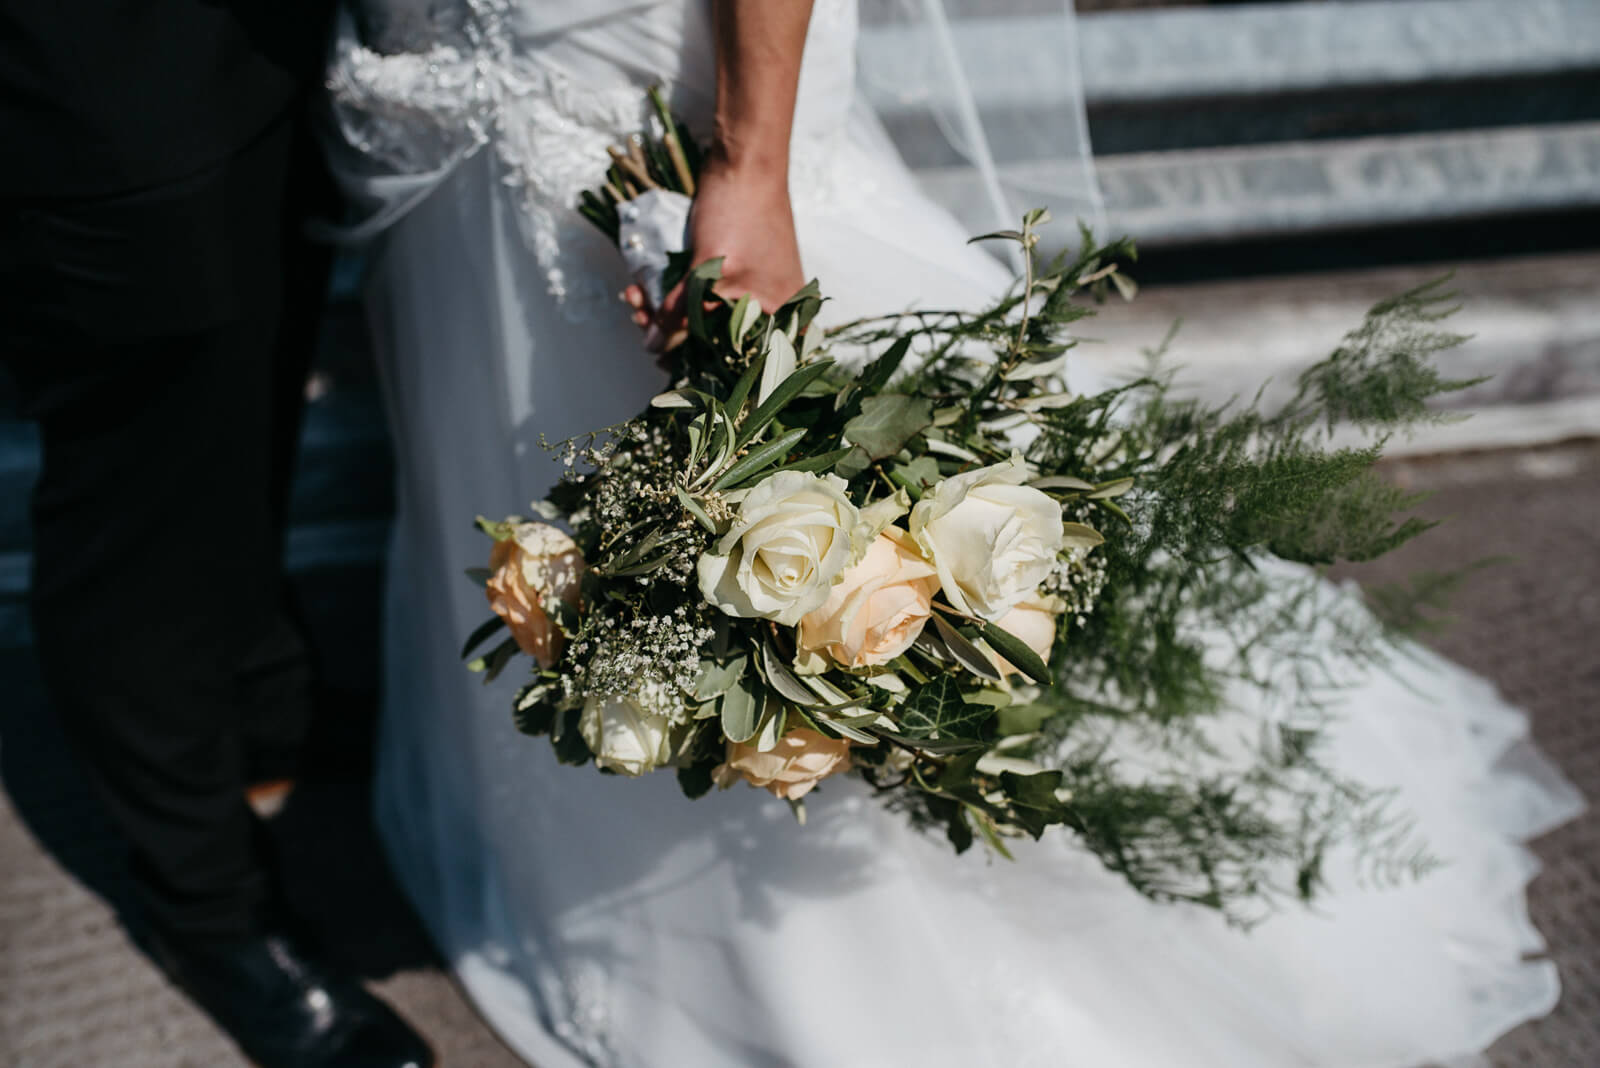 brides flowers during coupleshoot on rooftop reminiscent of new york